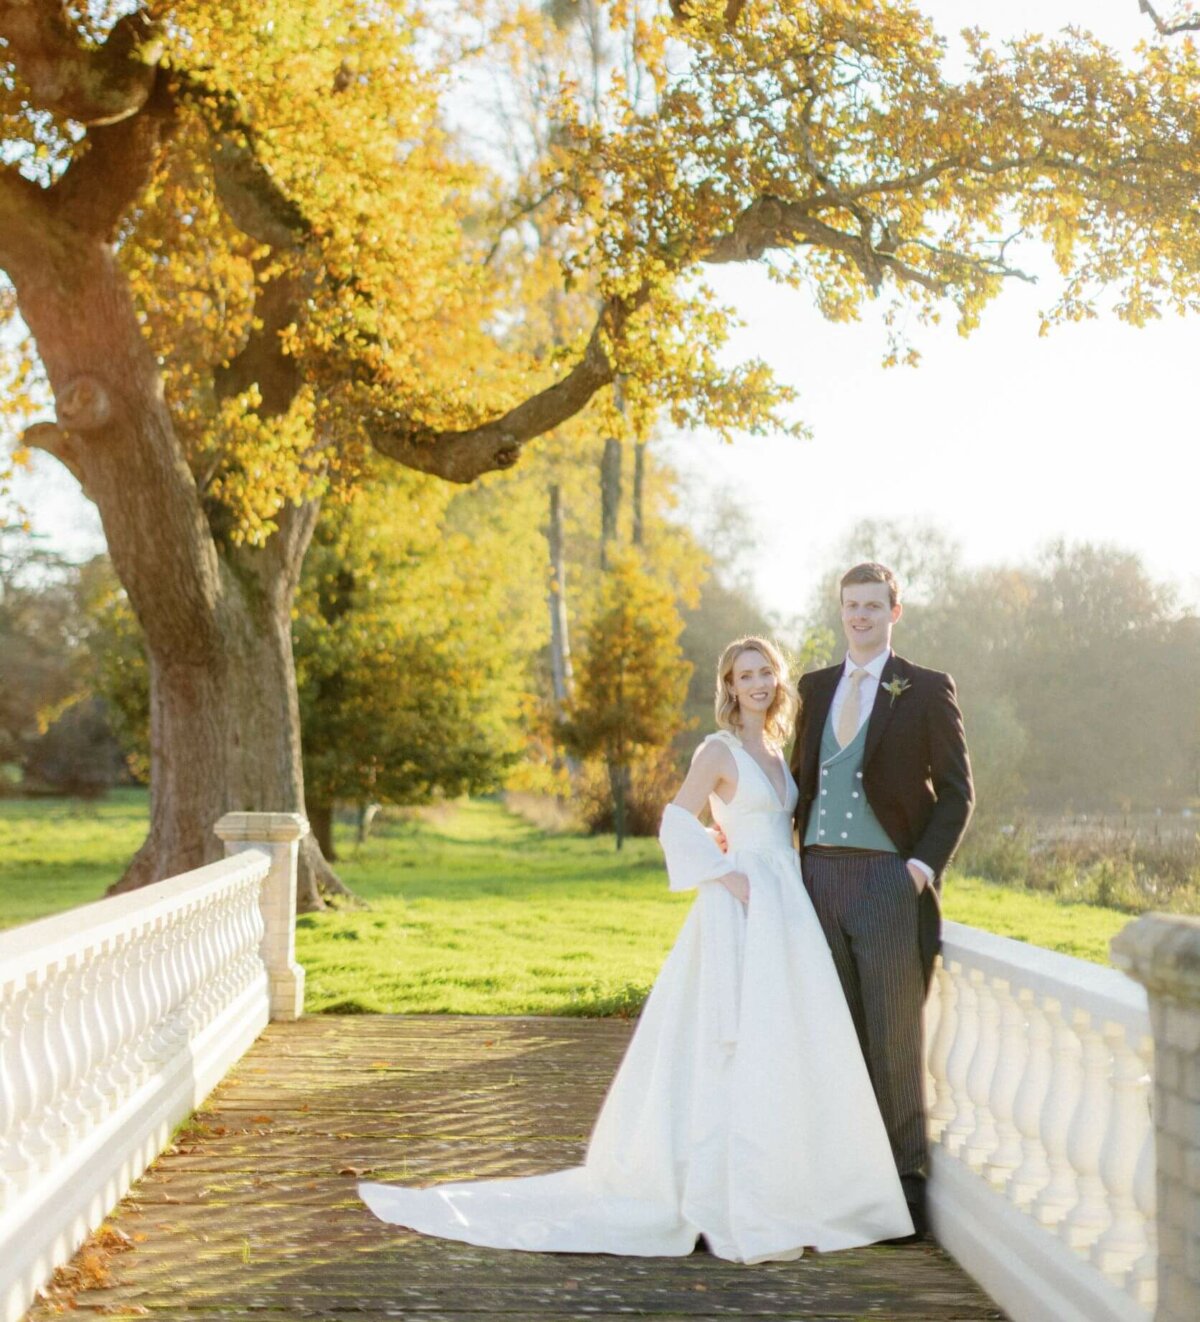 Emma and William Wedding at St Giles House, Couples Portraiture on the Lake Lawn Bridge